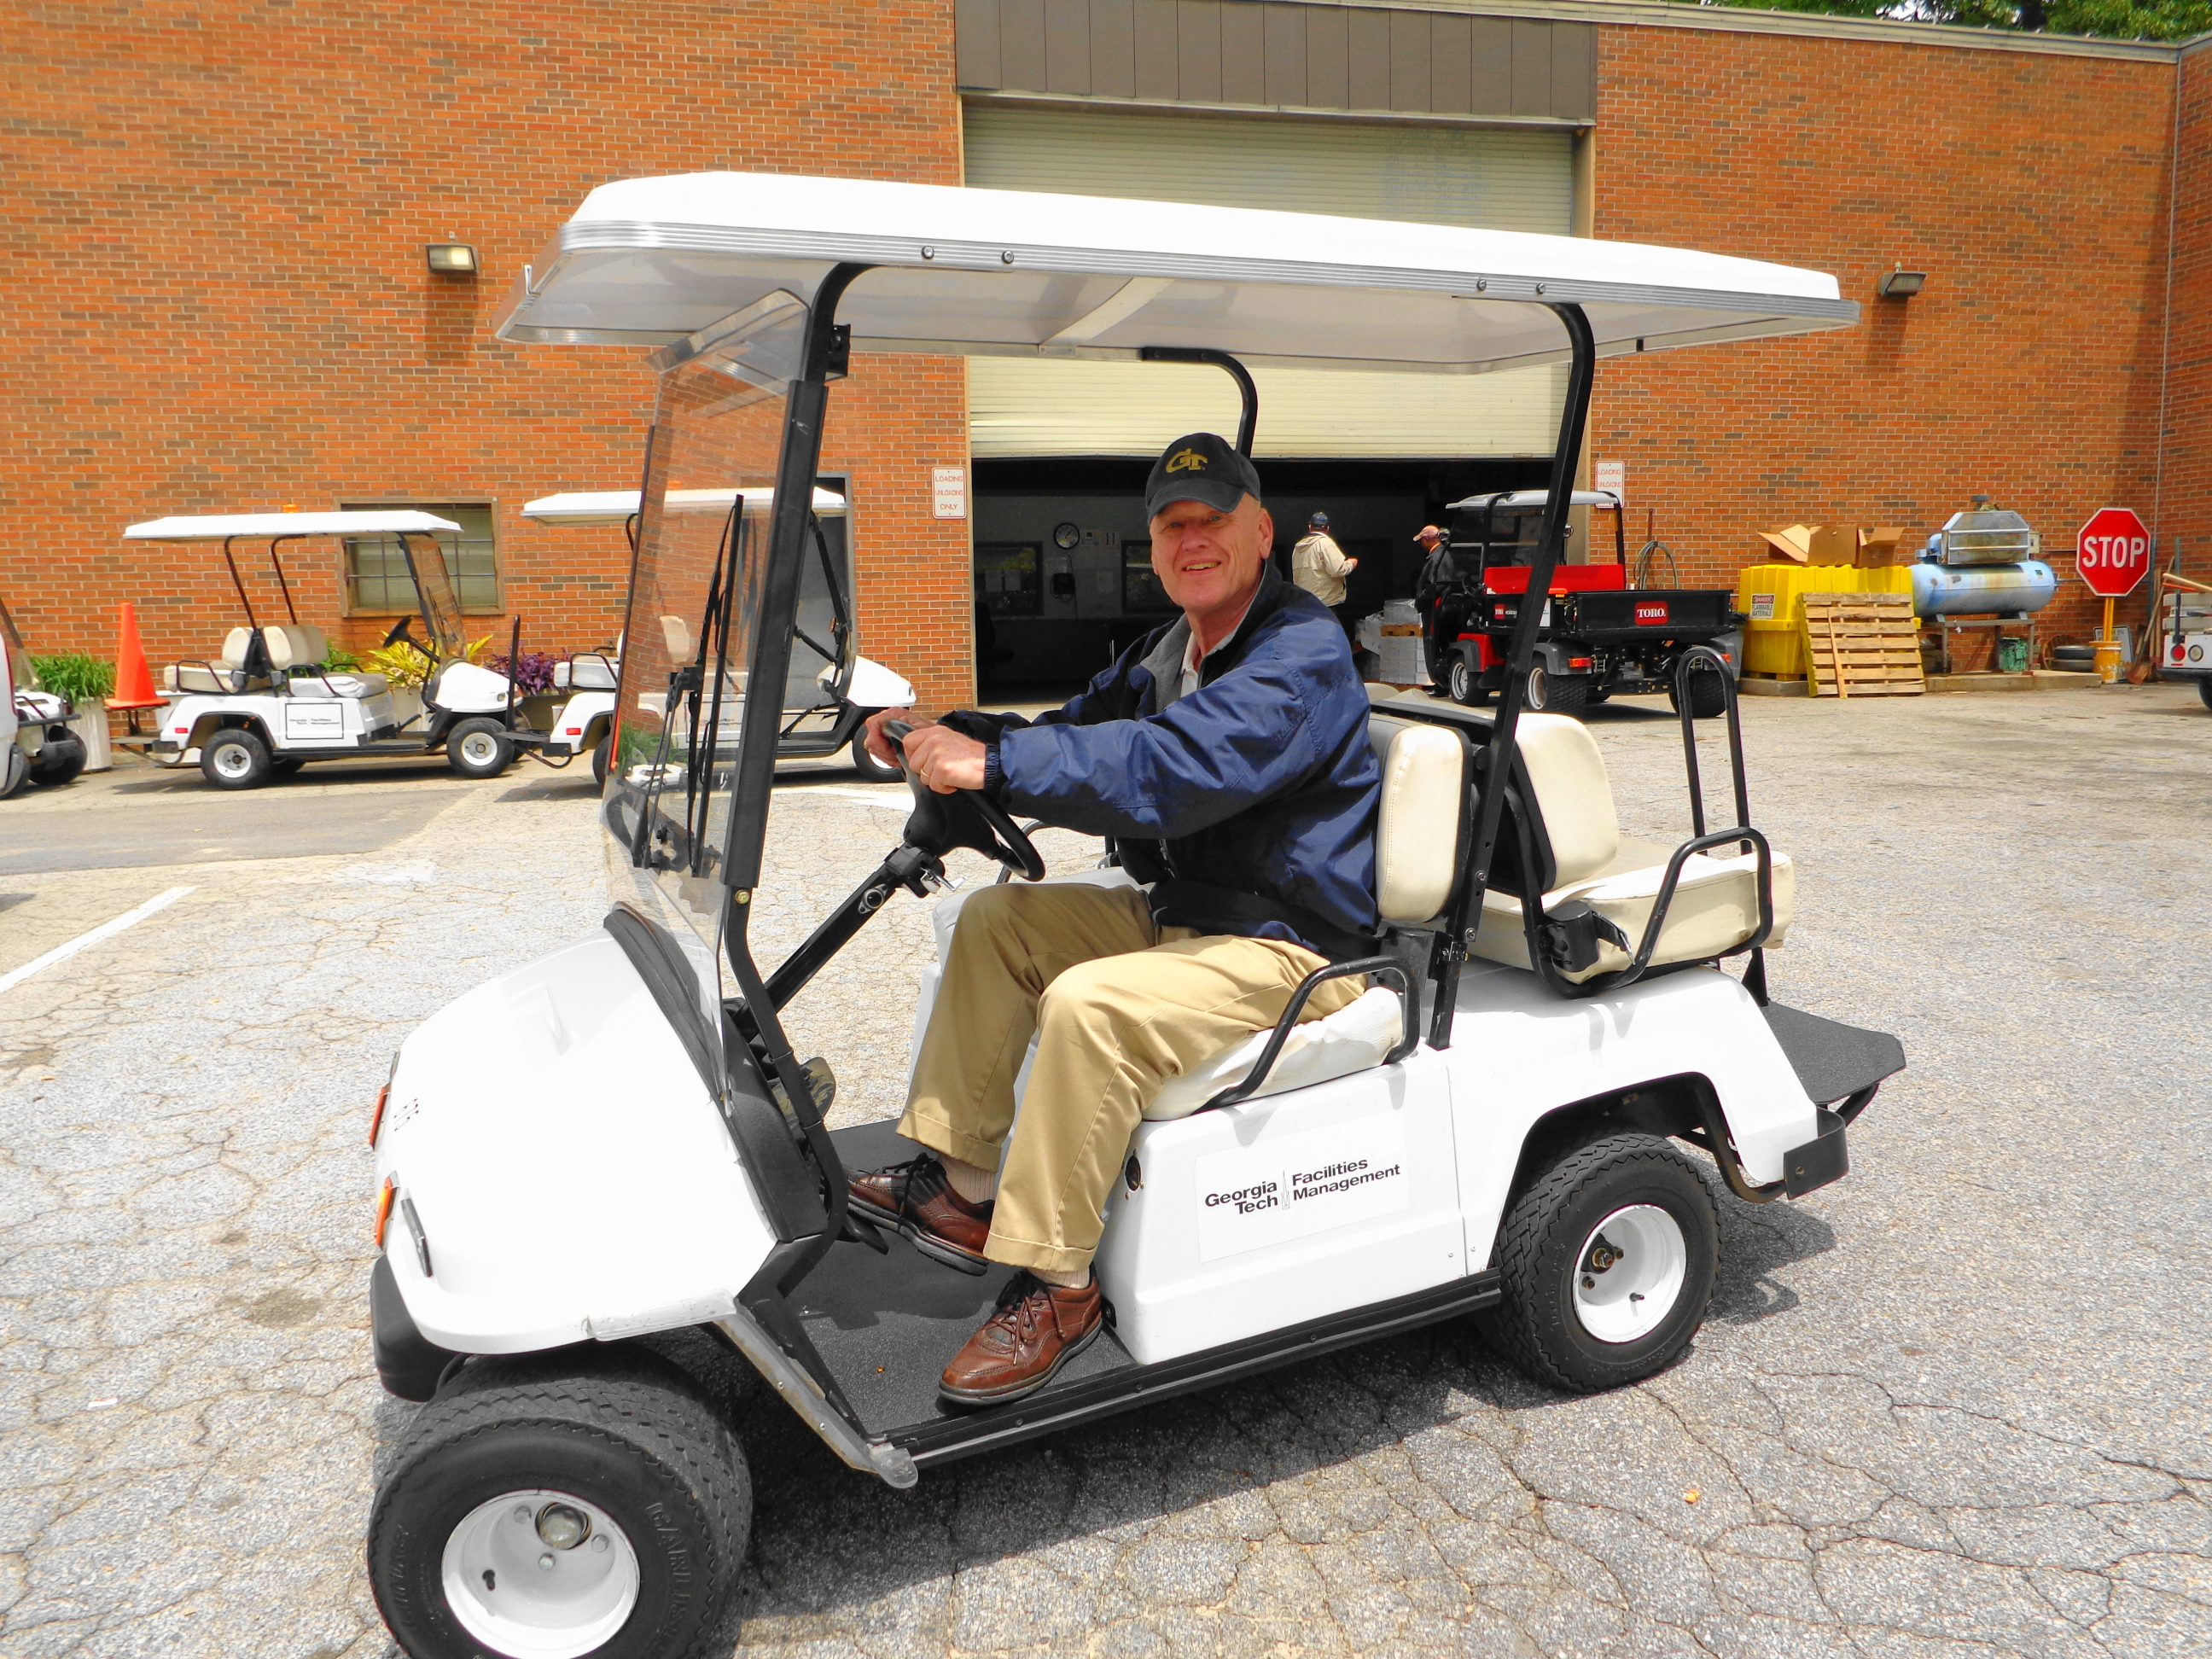 Warren Page in the golf cart that he was known for driving around campus. (Image courtesy of Bill Halabi)